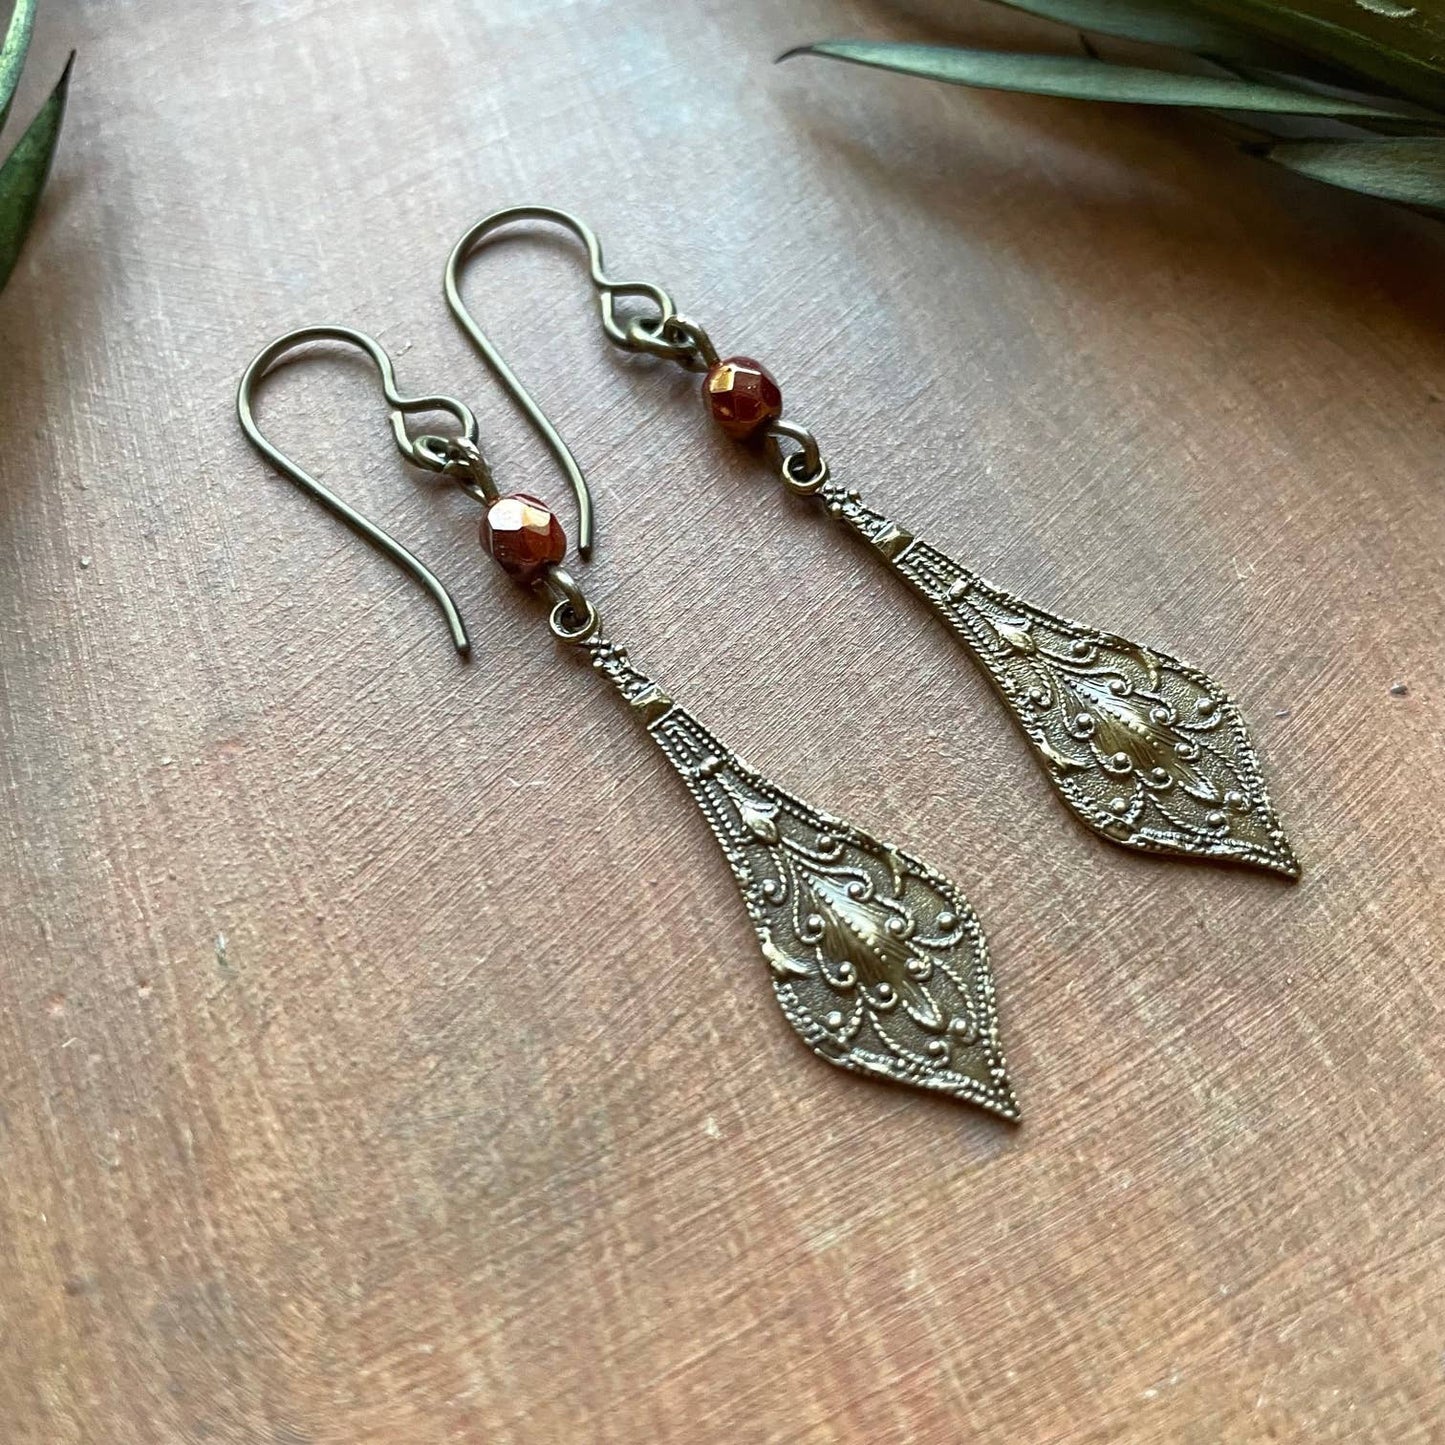 Edwardian Holiday Earrings -  Red Glass & Antiqued Brass